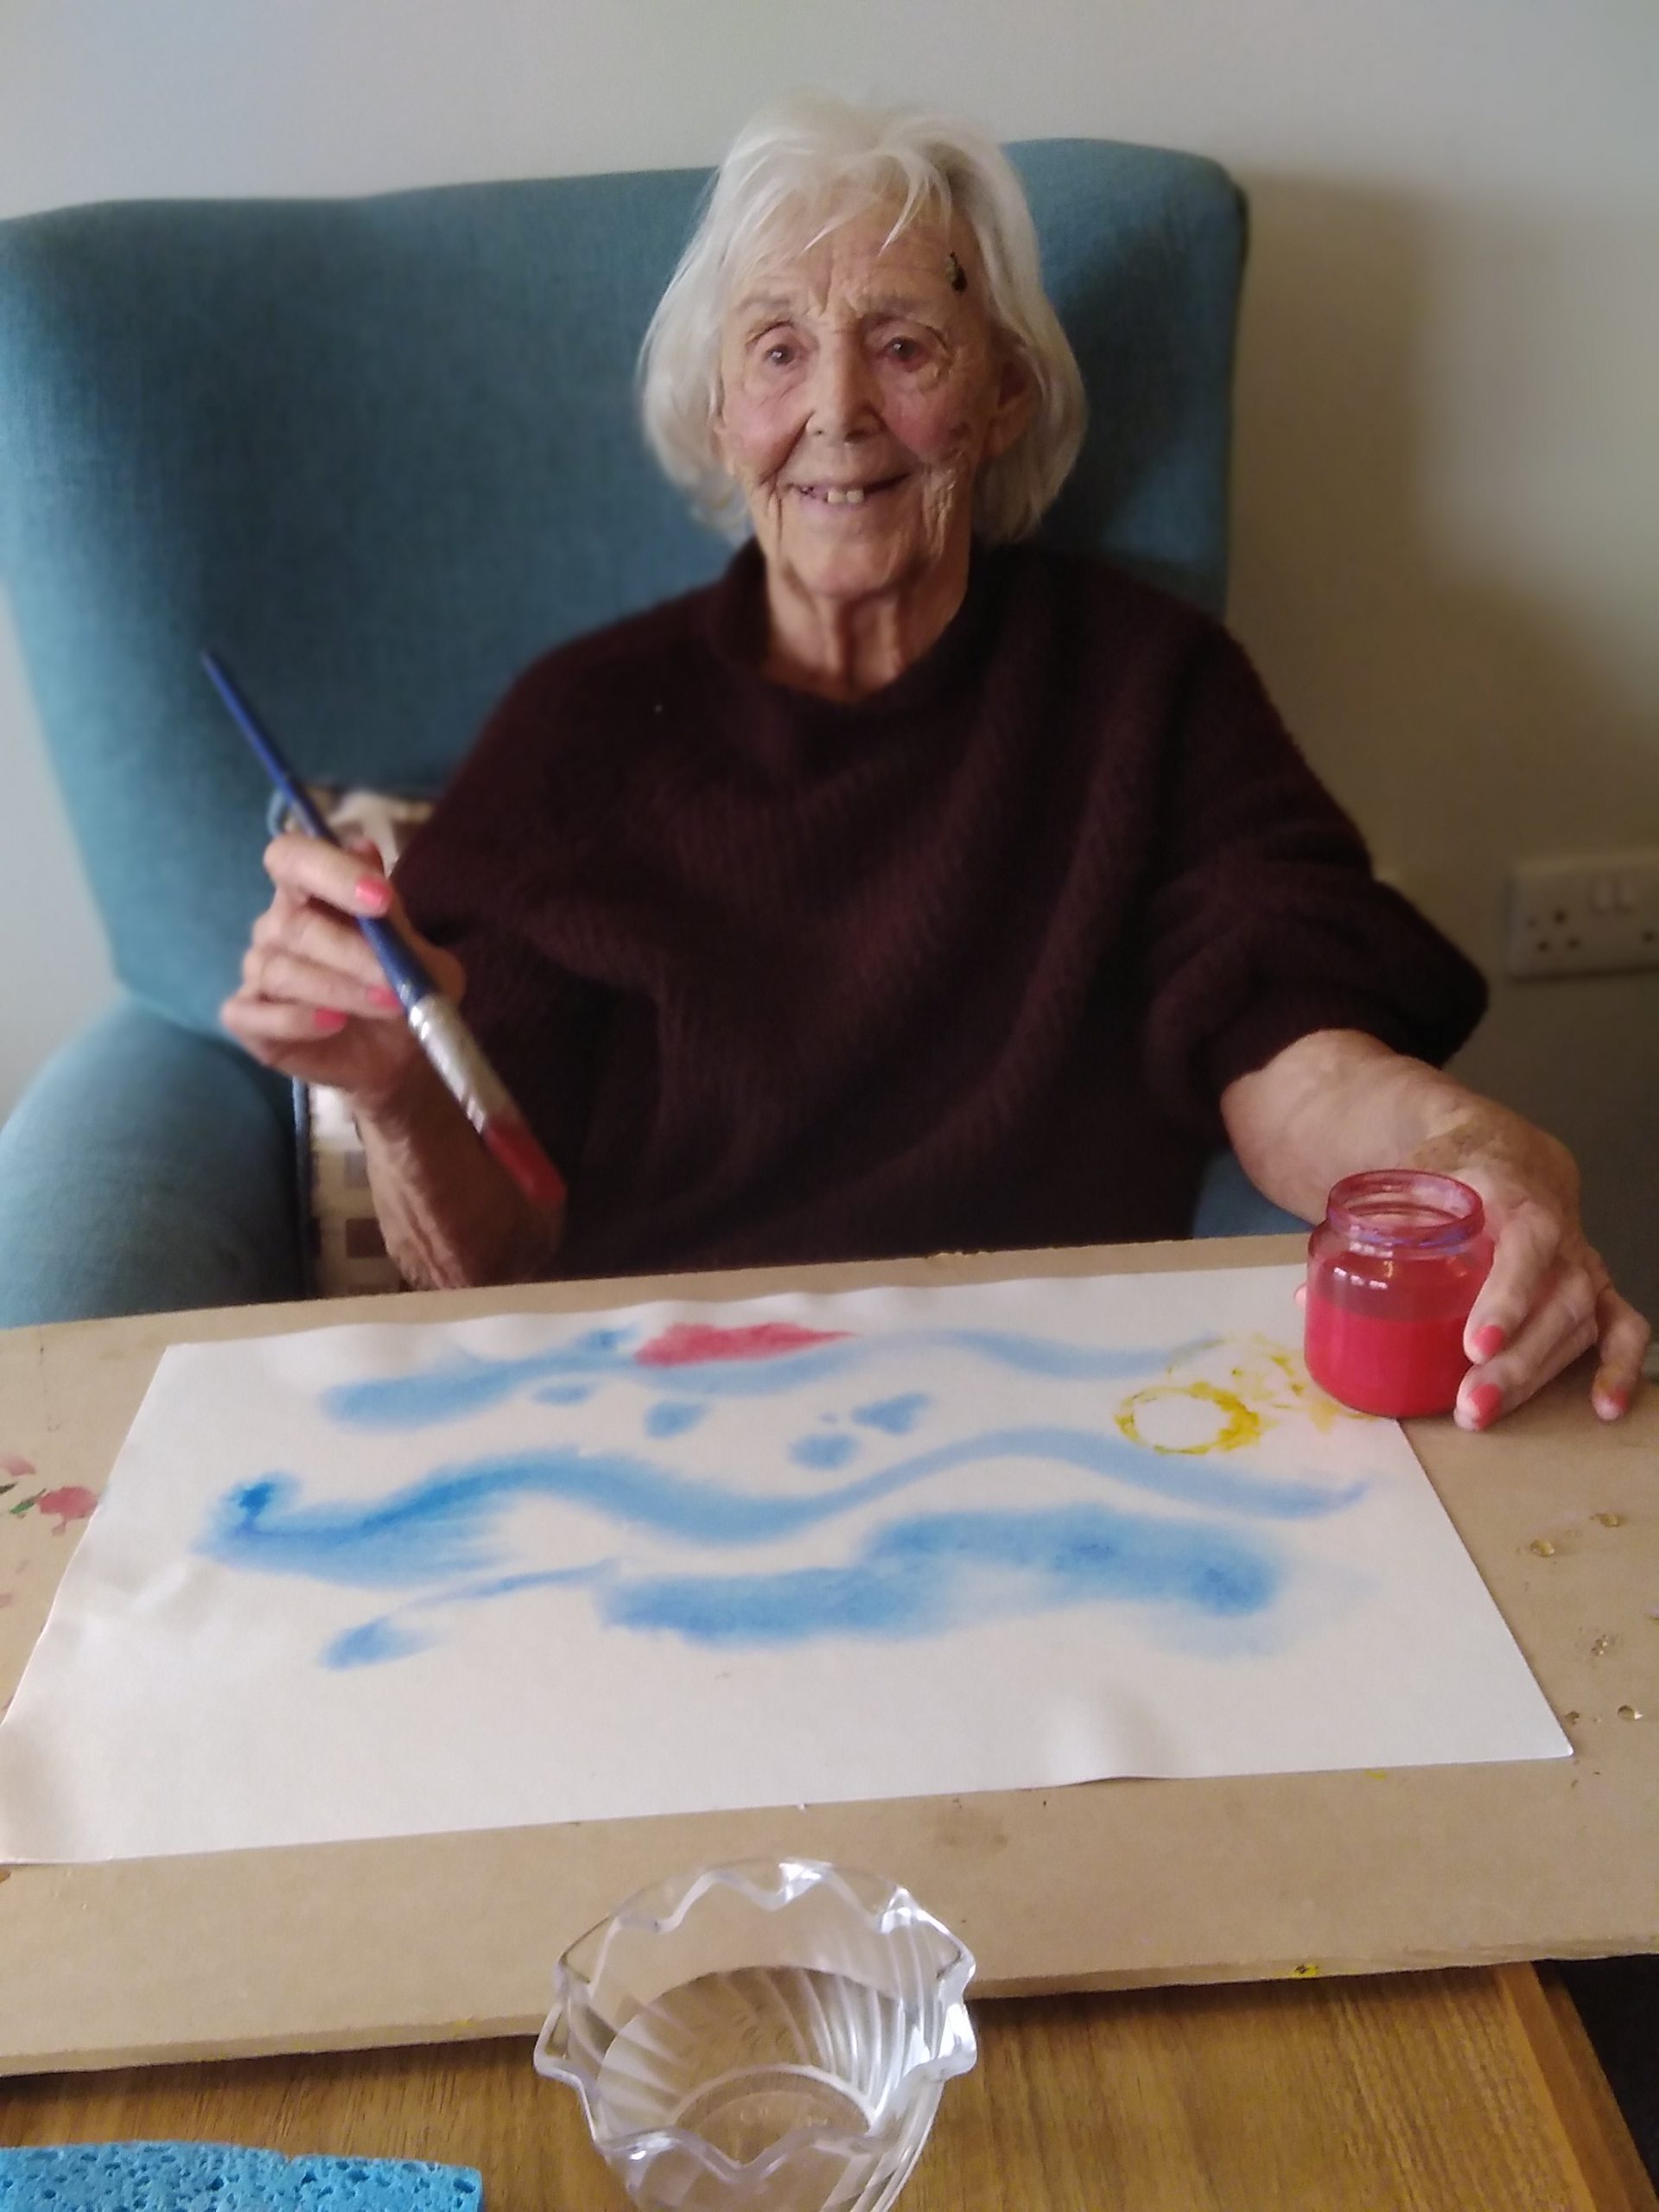 Care home resident enjoying arts and crafts